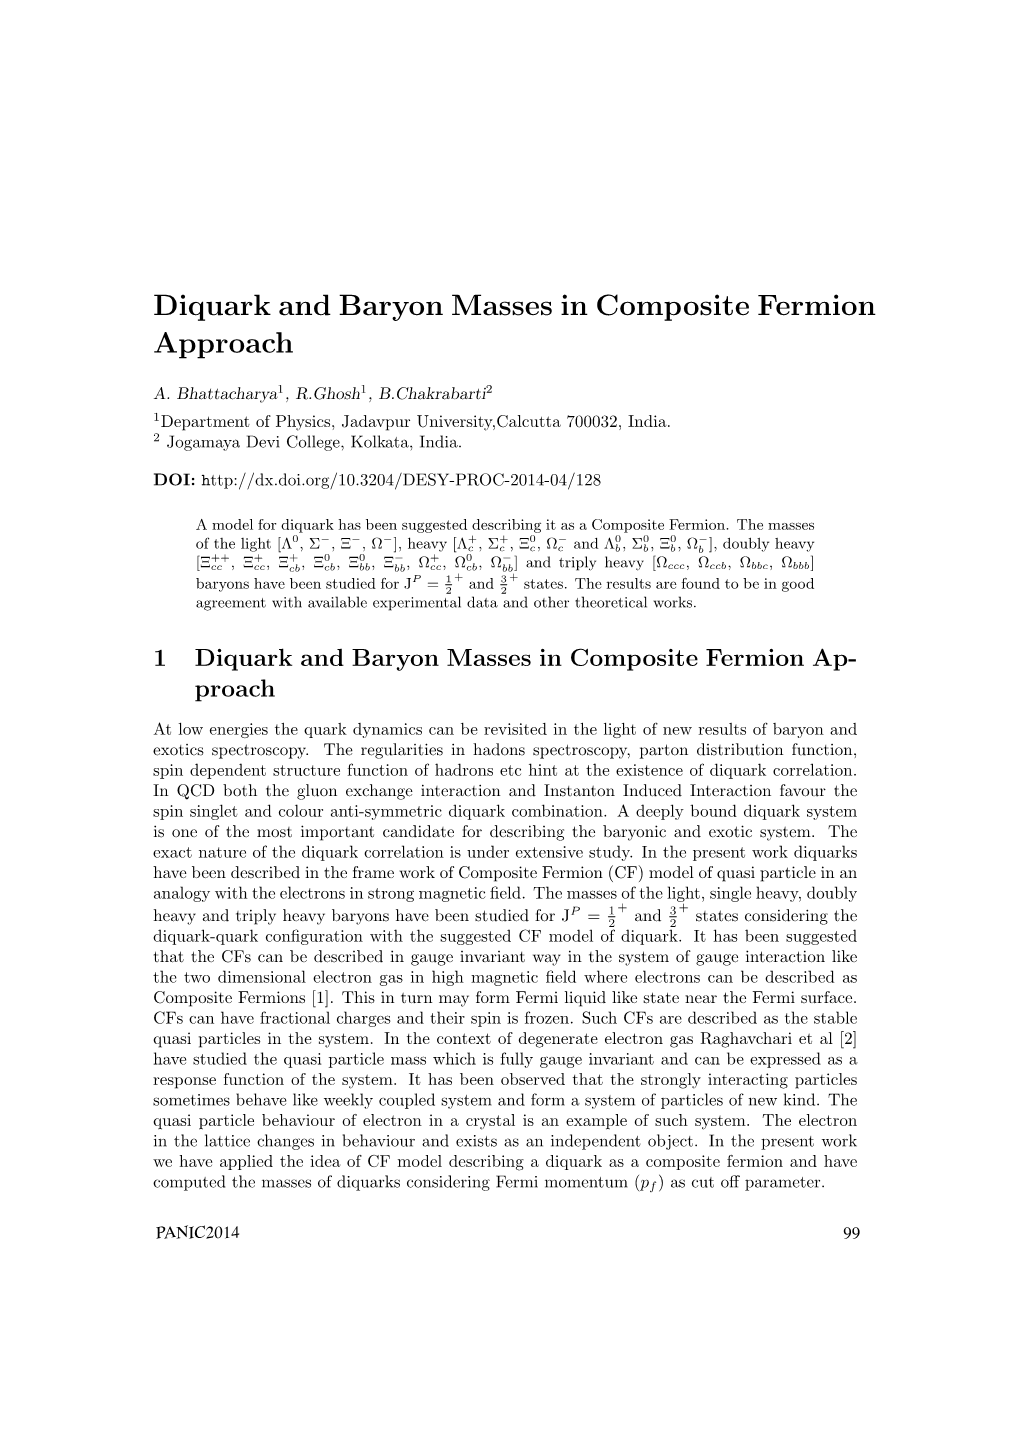 Diquark and Baryon Masses in Composite Fermion Approach